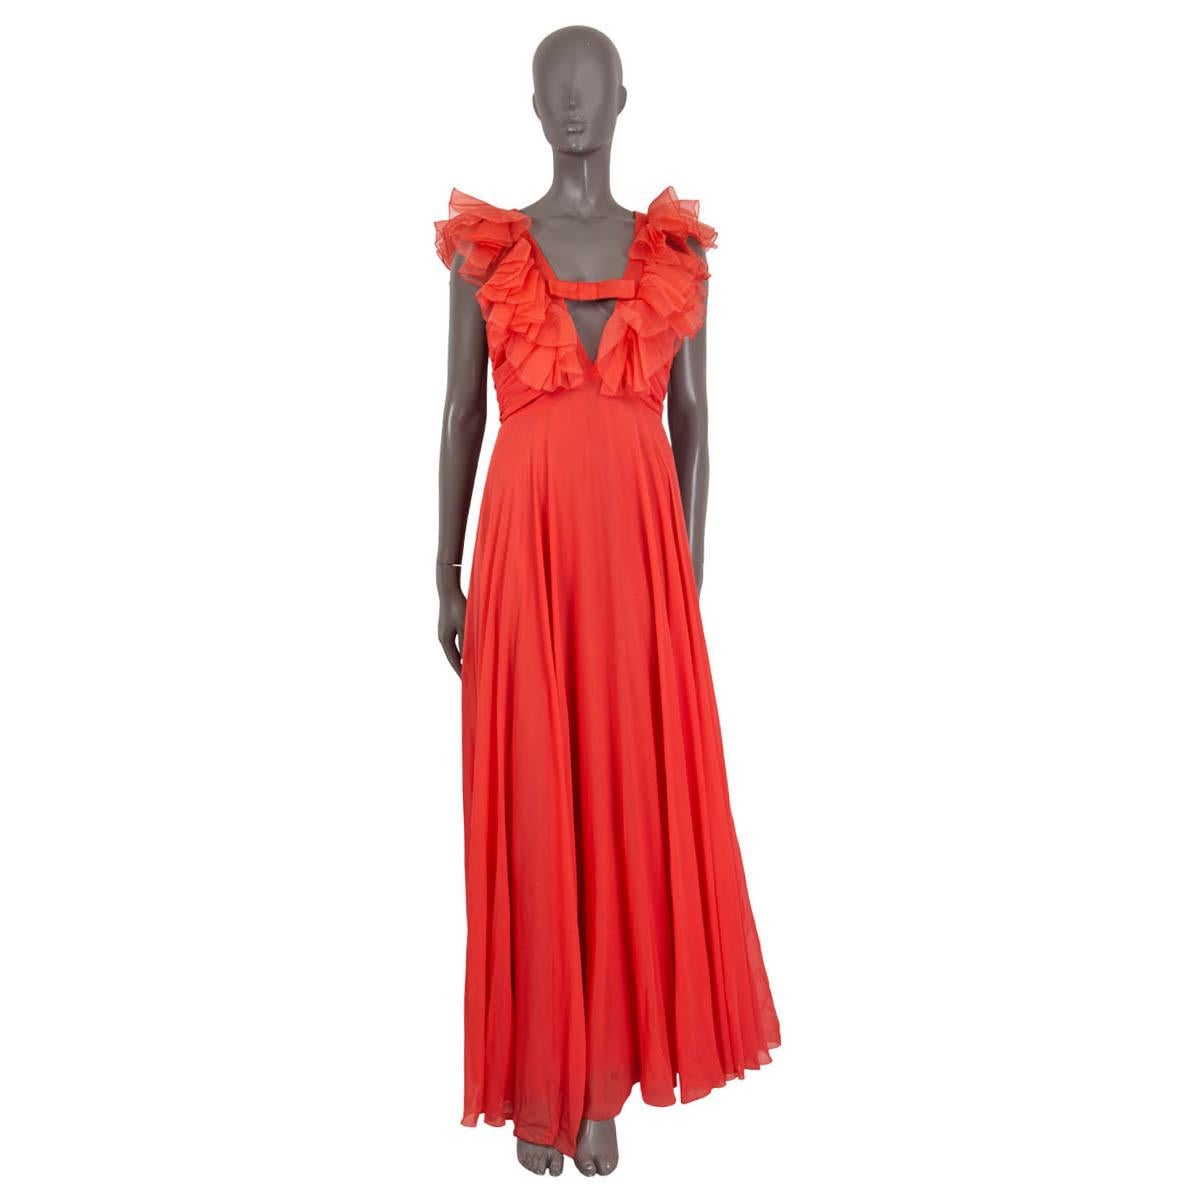 100% authentic Giambattista Valli sleeveless maxi gown in coral pink silk (100%). Features a deep v-neck and ruffle embellishments. Opens with a zipper and a hook on the back. Unlined. Has been worn and is in excellent condition. 

Measurements
Tag